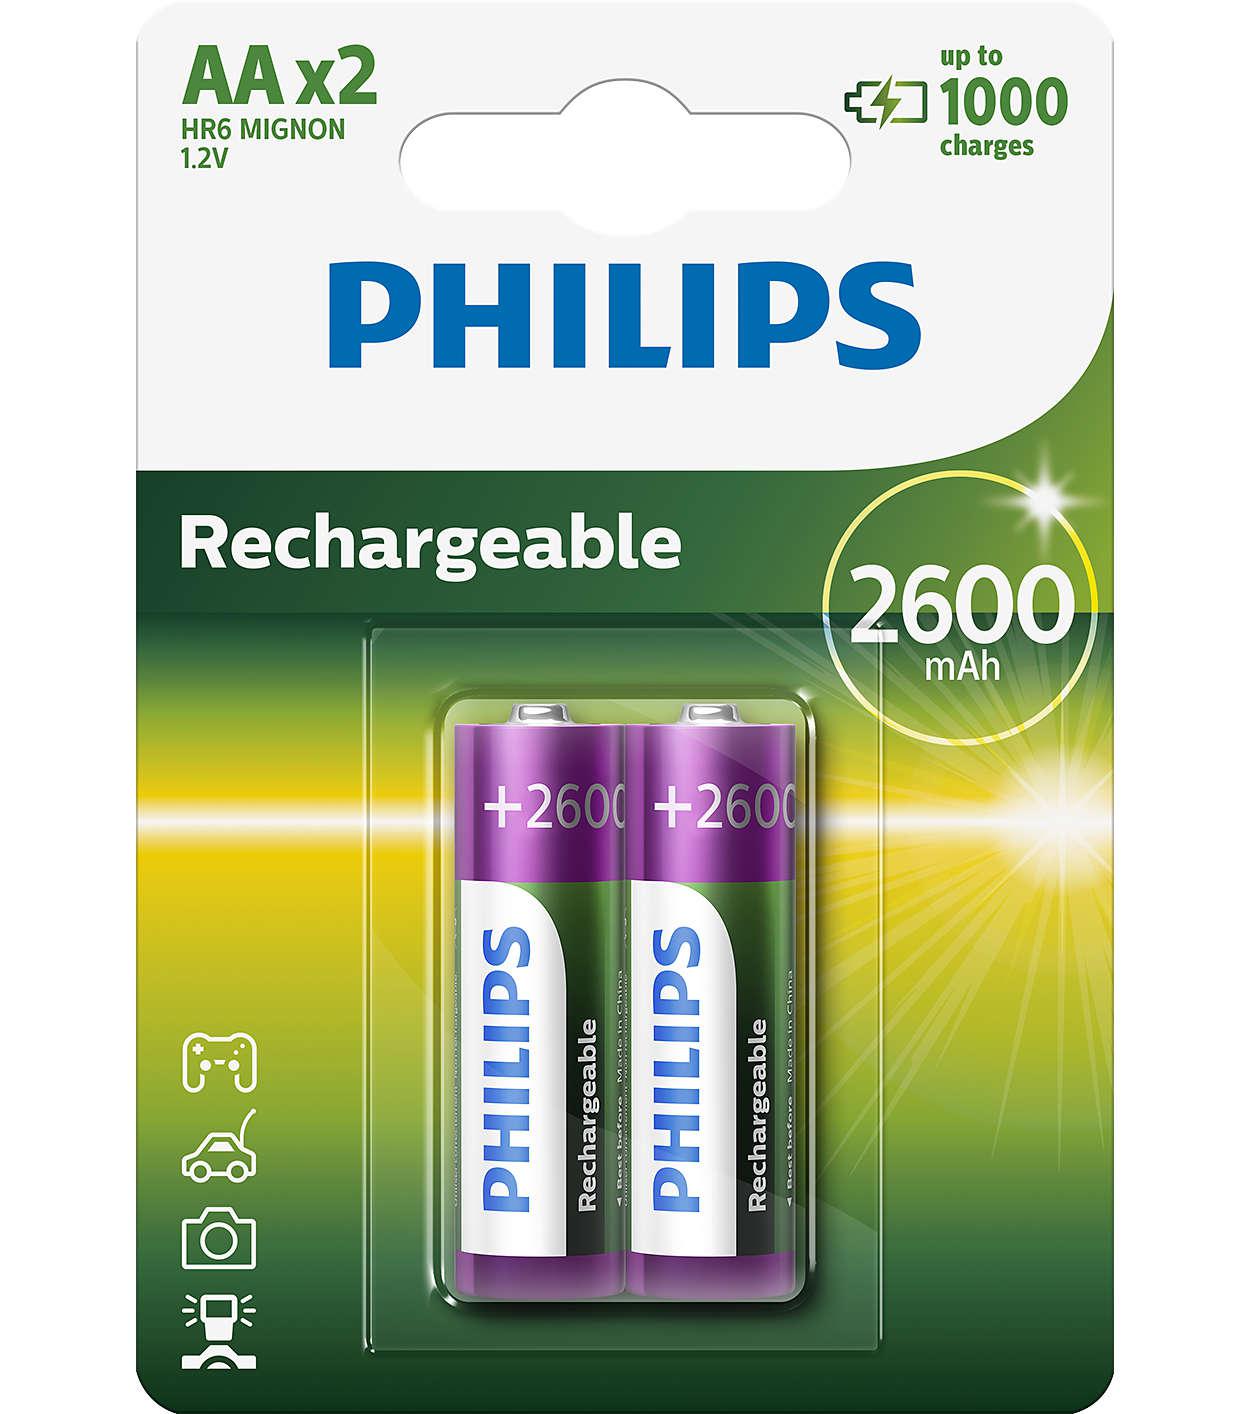 R6 MULTILIFE B2, Baterie philips rechargeable 2600 mah aa b2 (set 2 buc.),
